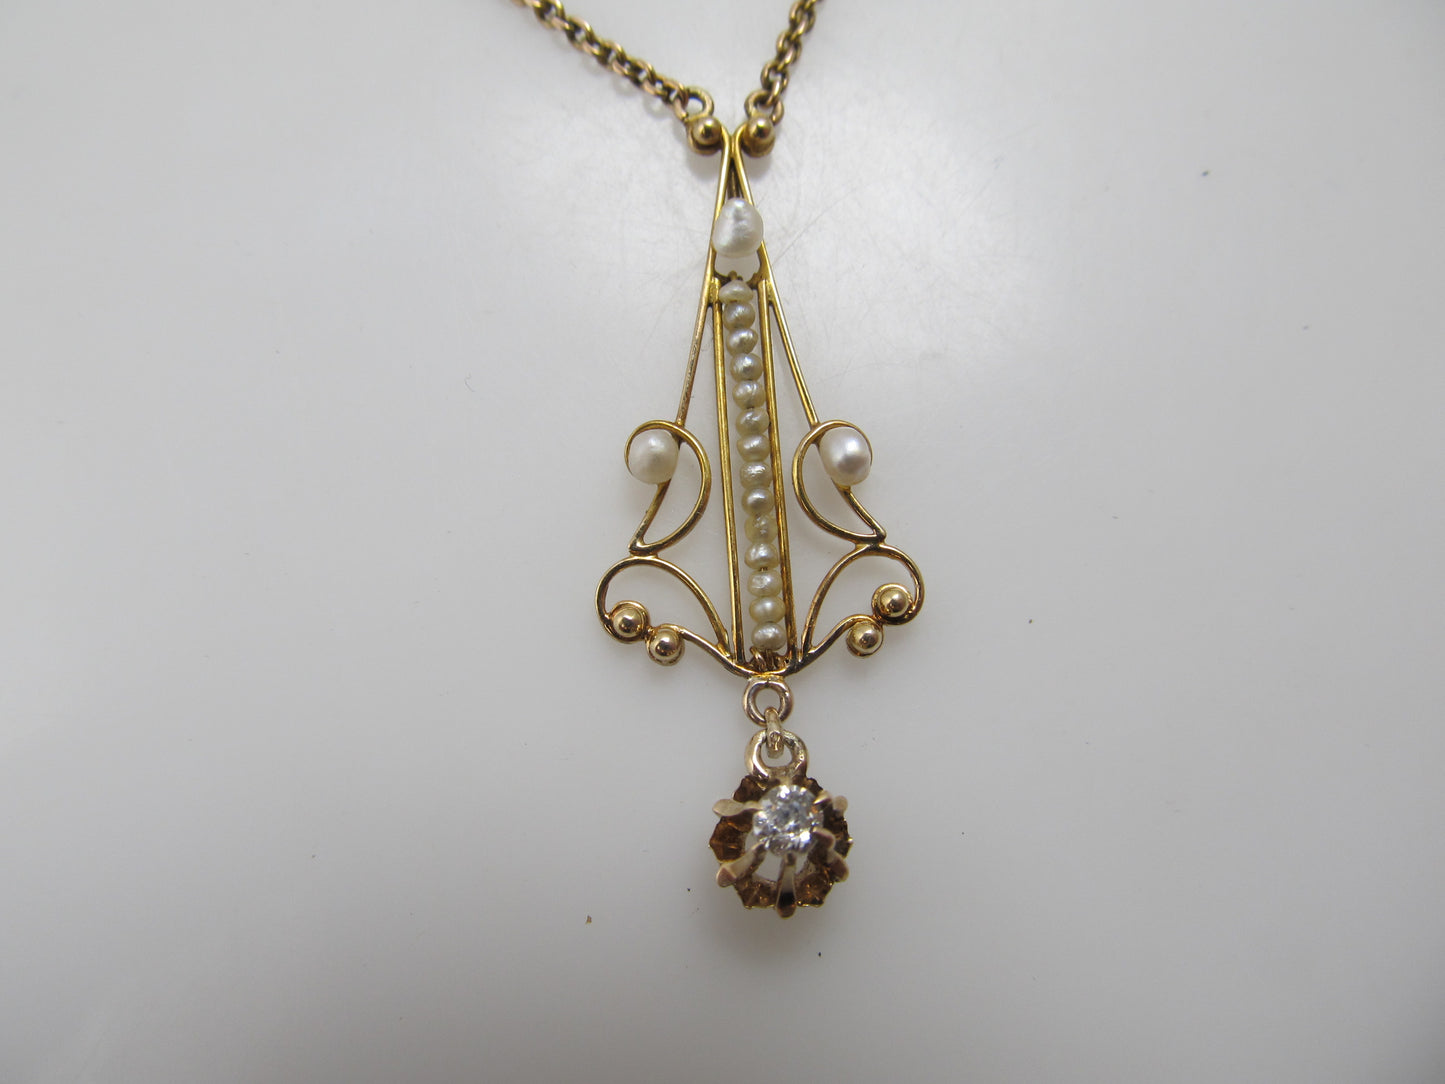 Edwardian pearl and diamond necklace – Victorious